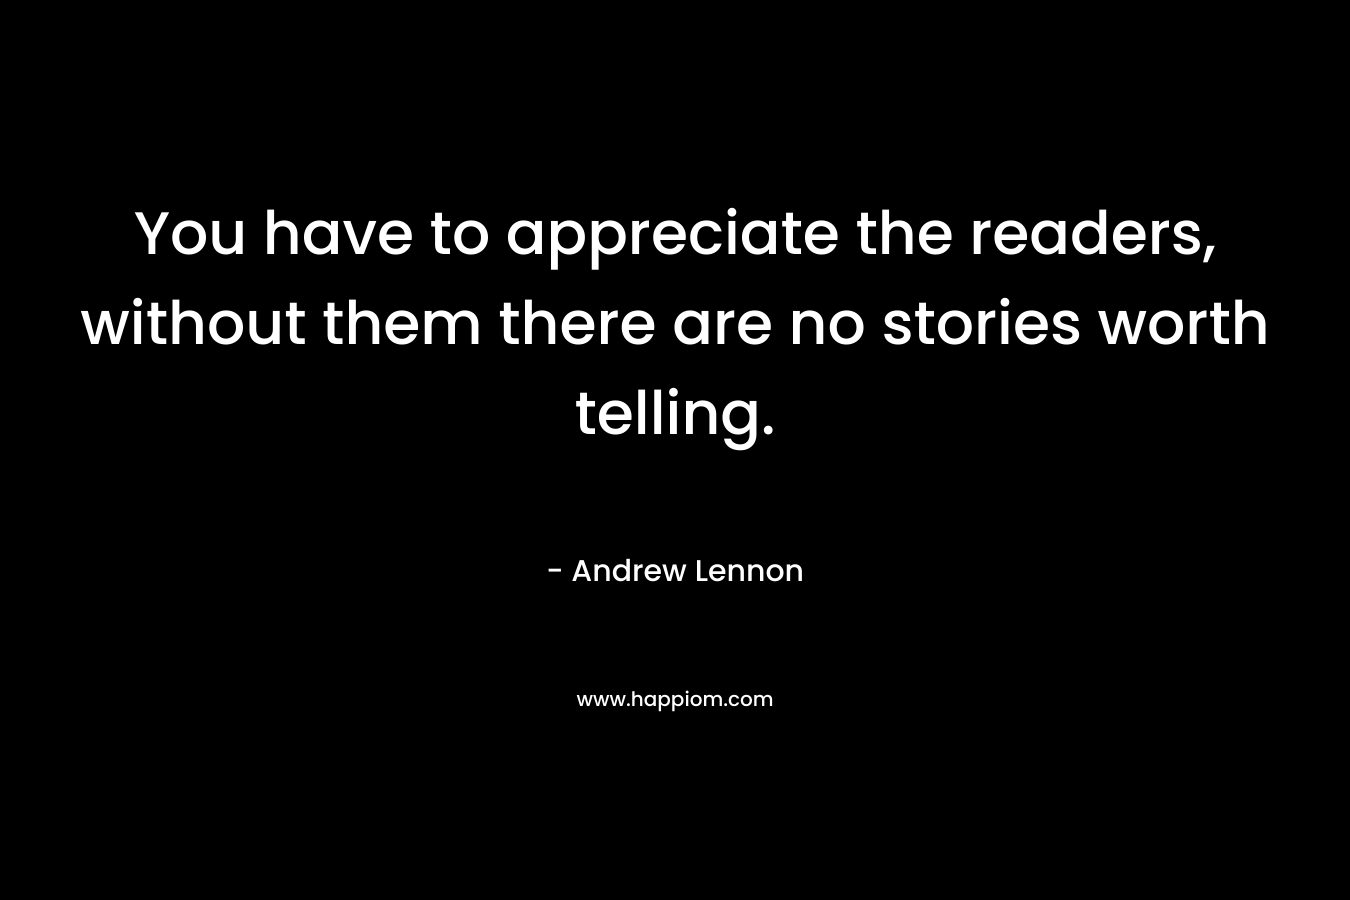 You have to appreciate the readers, without them there are no stories worth telling. – Andrew Lennon